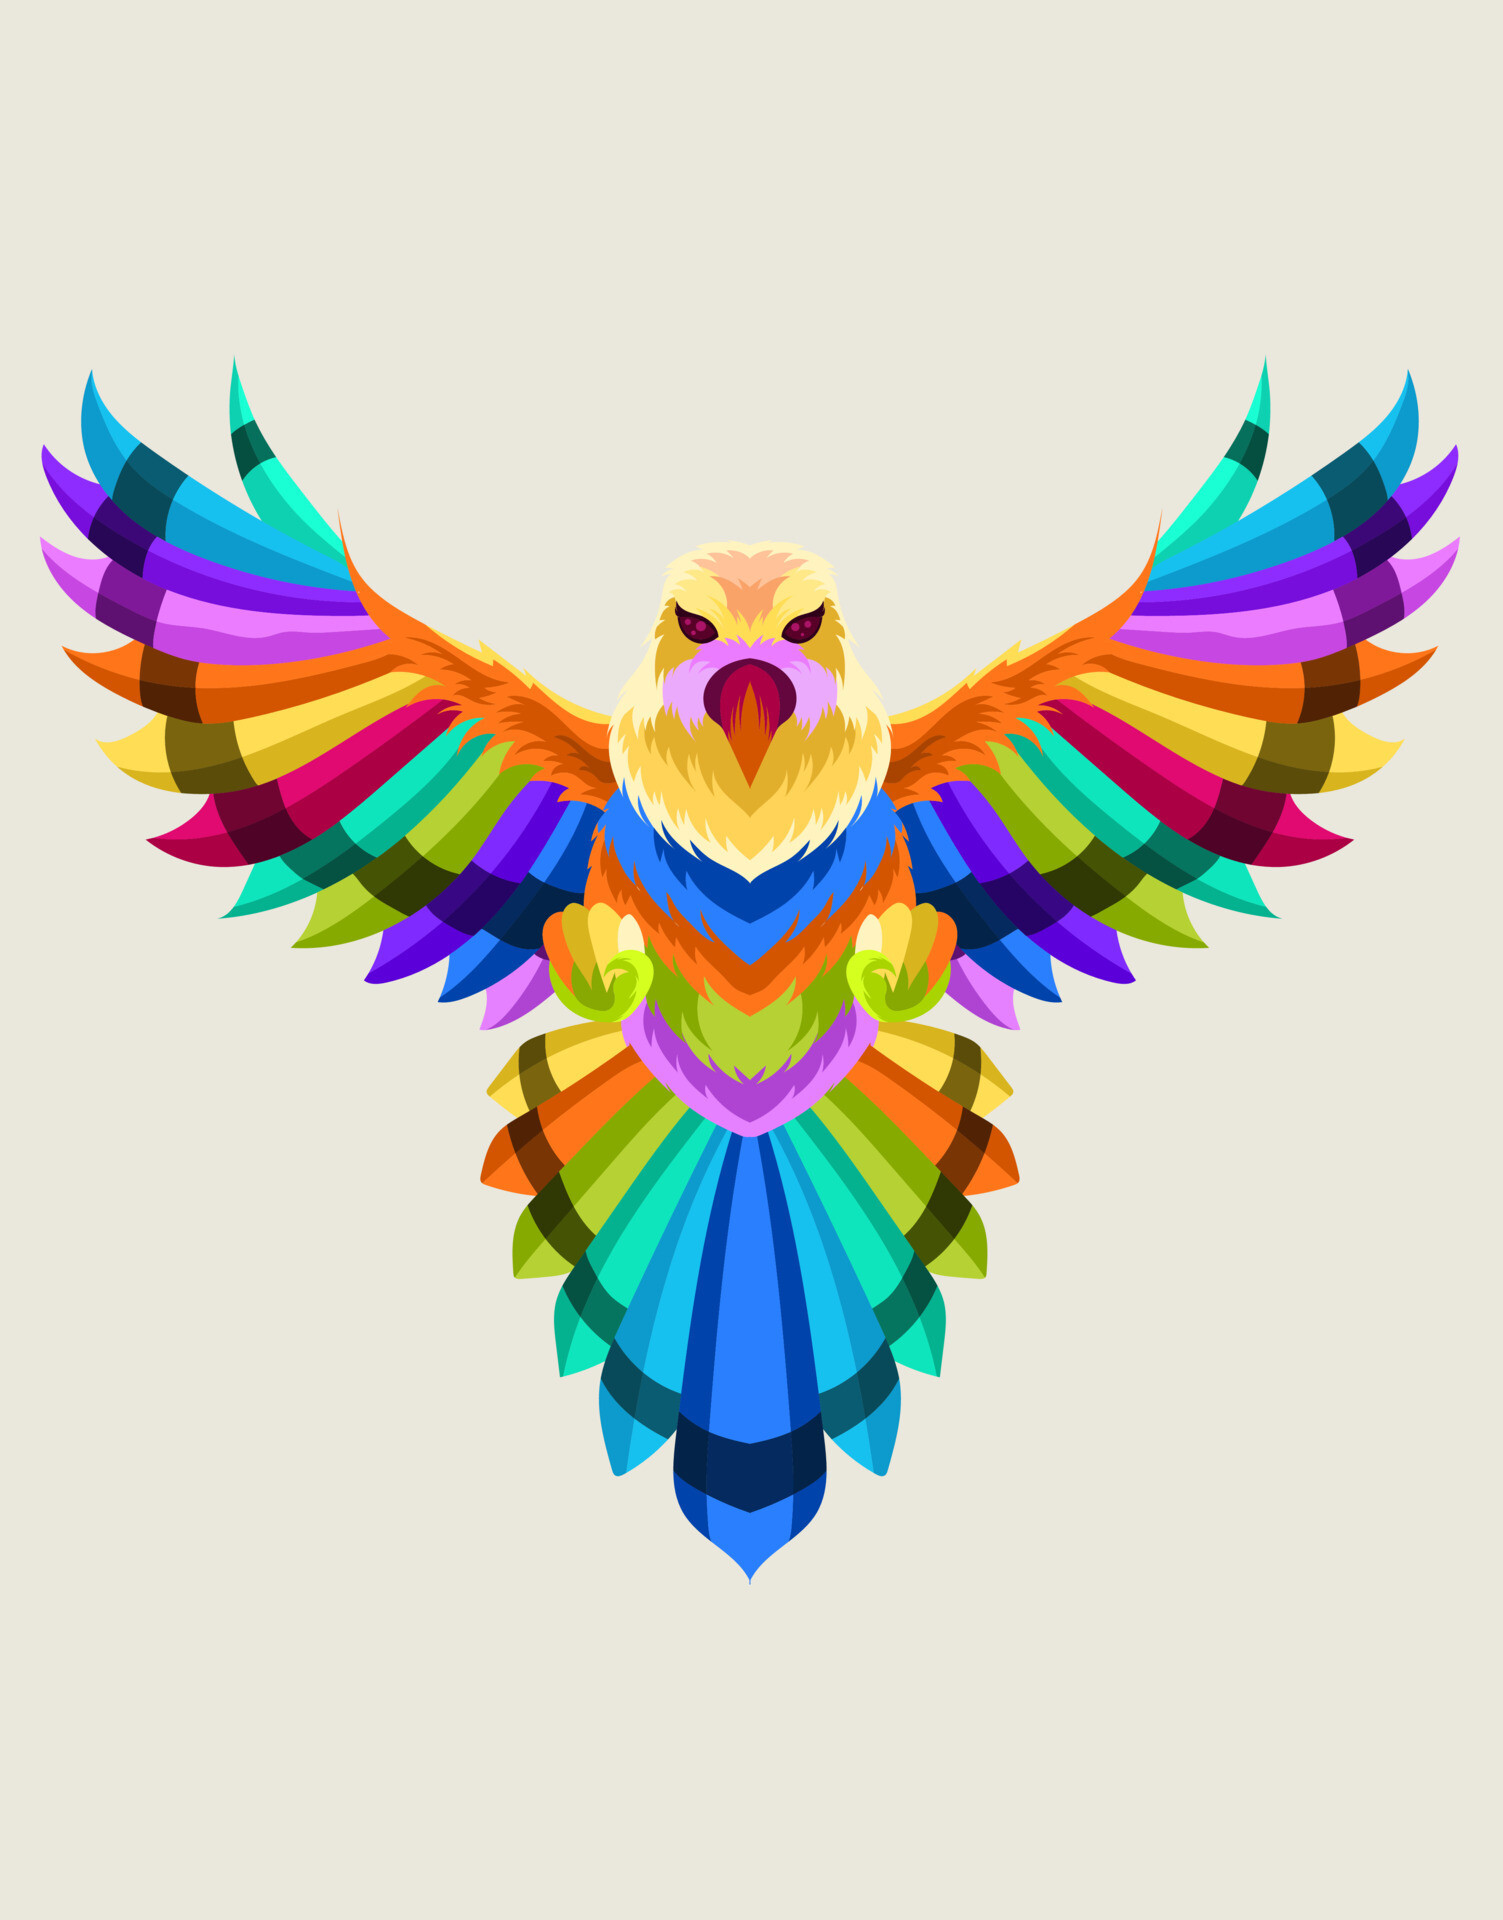 Geometric Animal: Flying eagle vector art, The vibrant one, The colorful one. 1510x1920 HD Wallpaper.